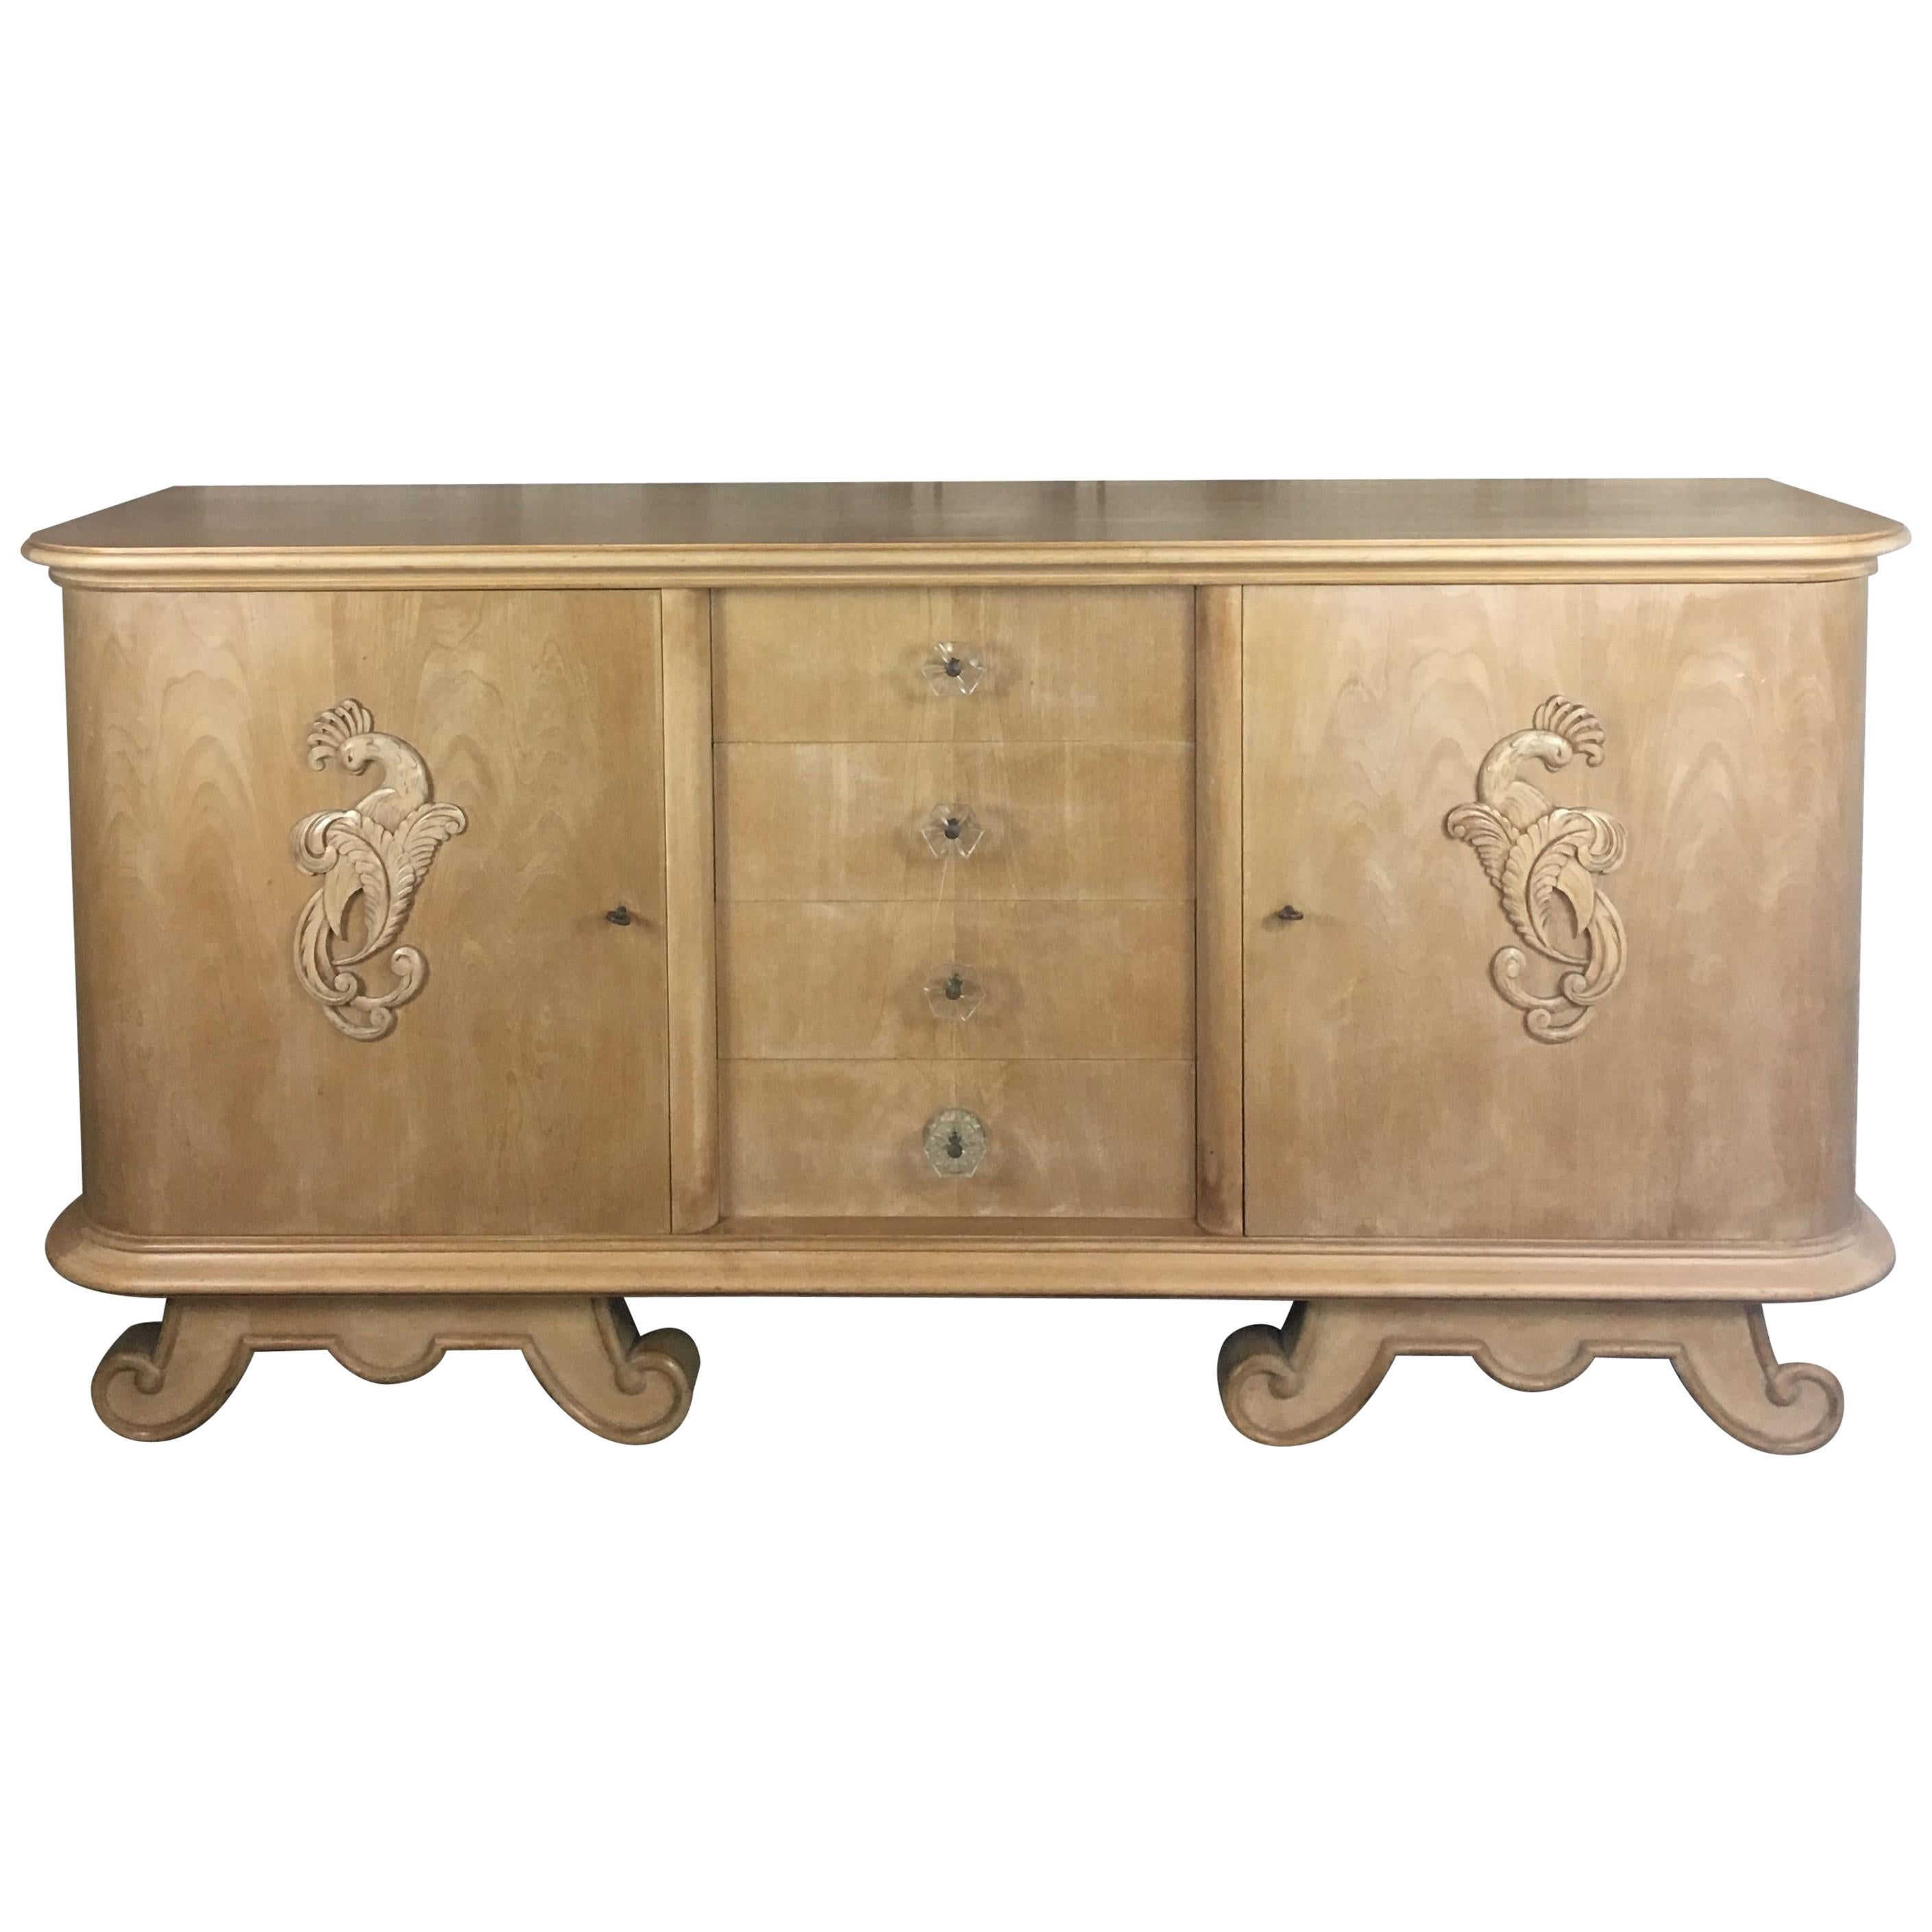 A stunning French midcentury sycamore sideboard, credenza or buffet in the style of Andre Arbus and Rene Prou with 4 drawers behind two doors having centered hand carved phoenix and trim above scrolled feet, circa 1940s. 

Beautifully designed and